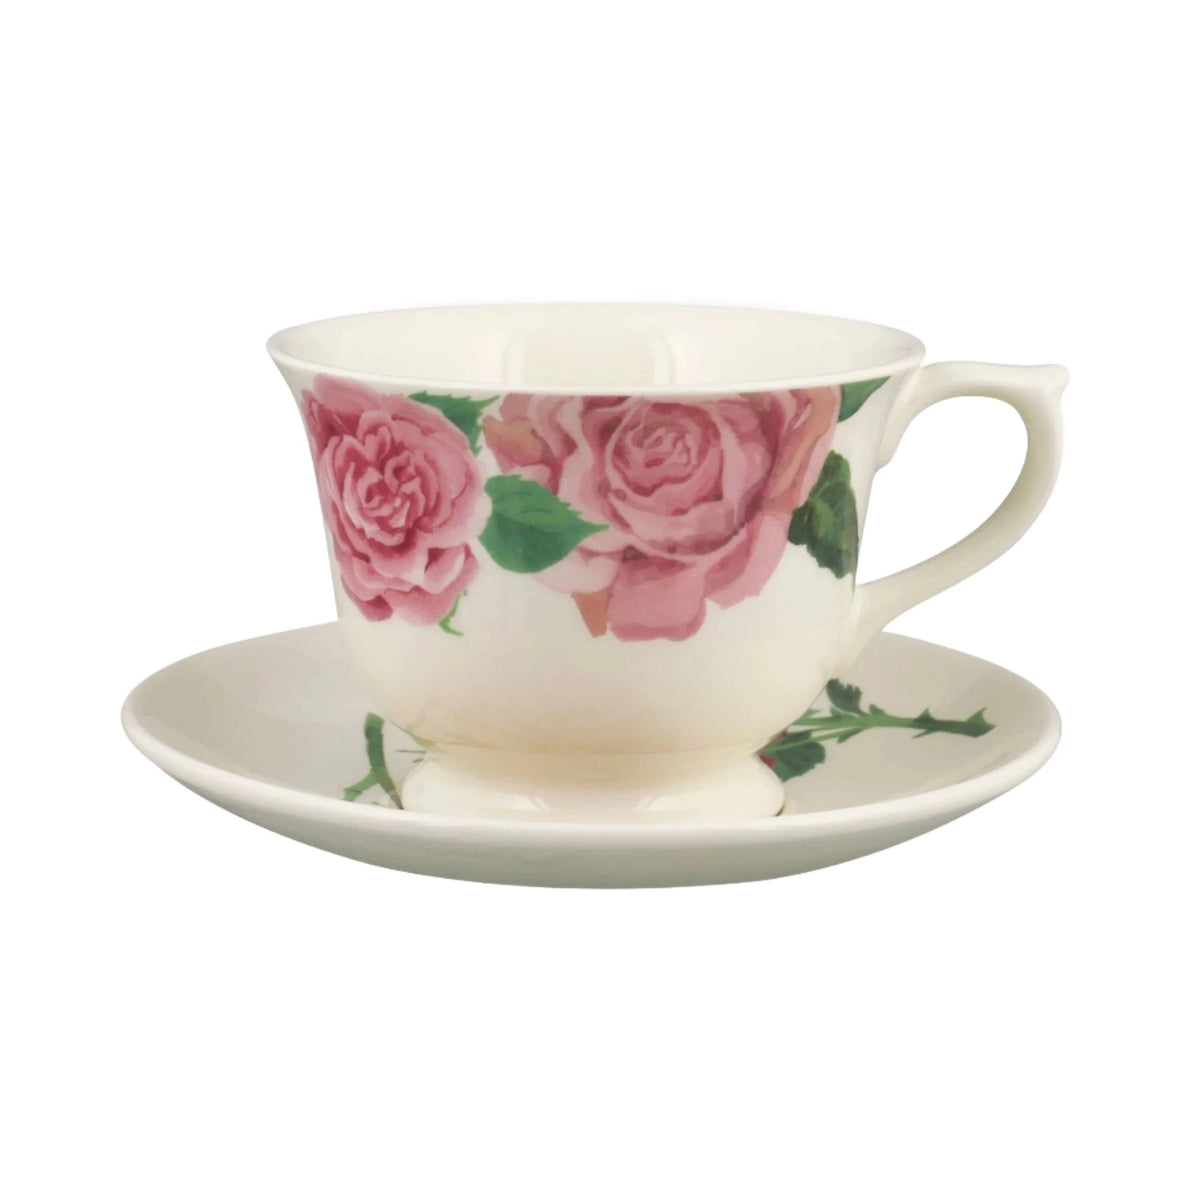 Roses All My Life Large Teacup & Saucer